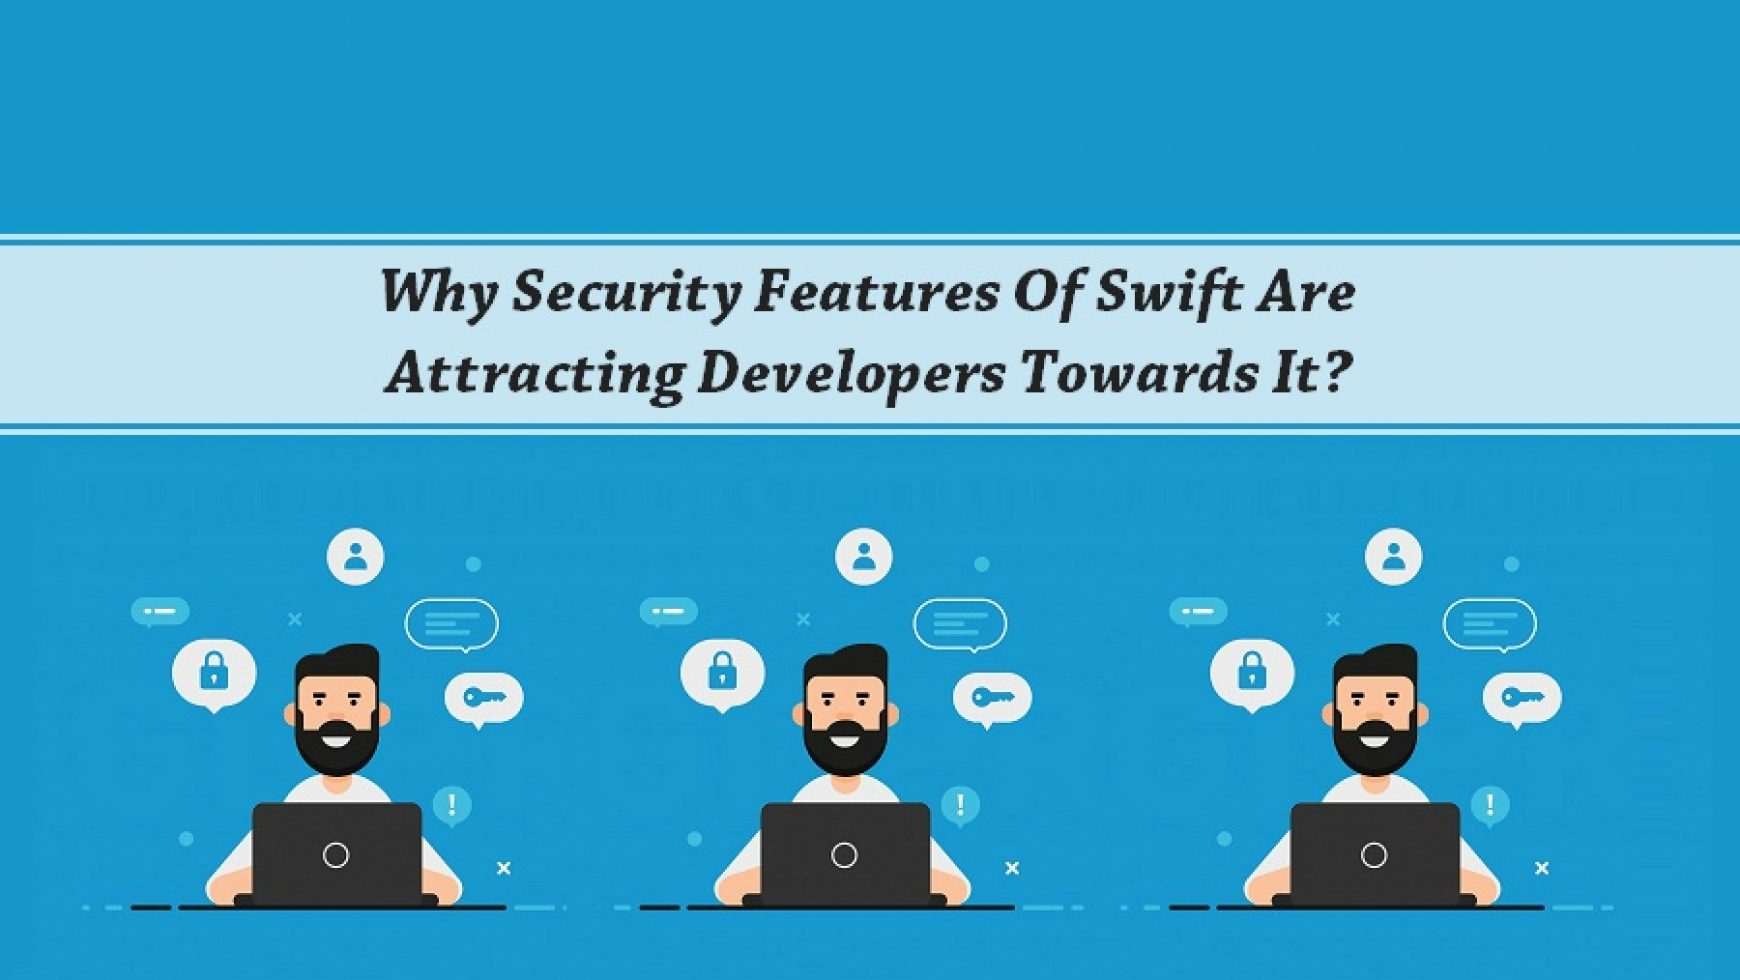 Why Security Features Of Swift Are Attracting Developers Towards It.